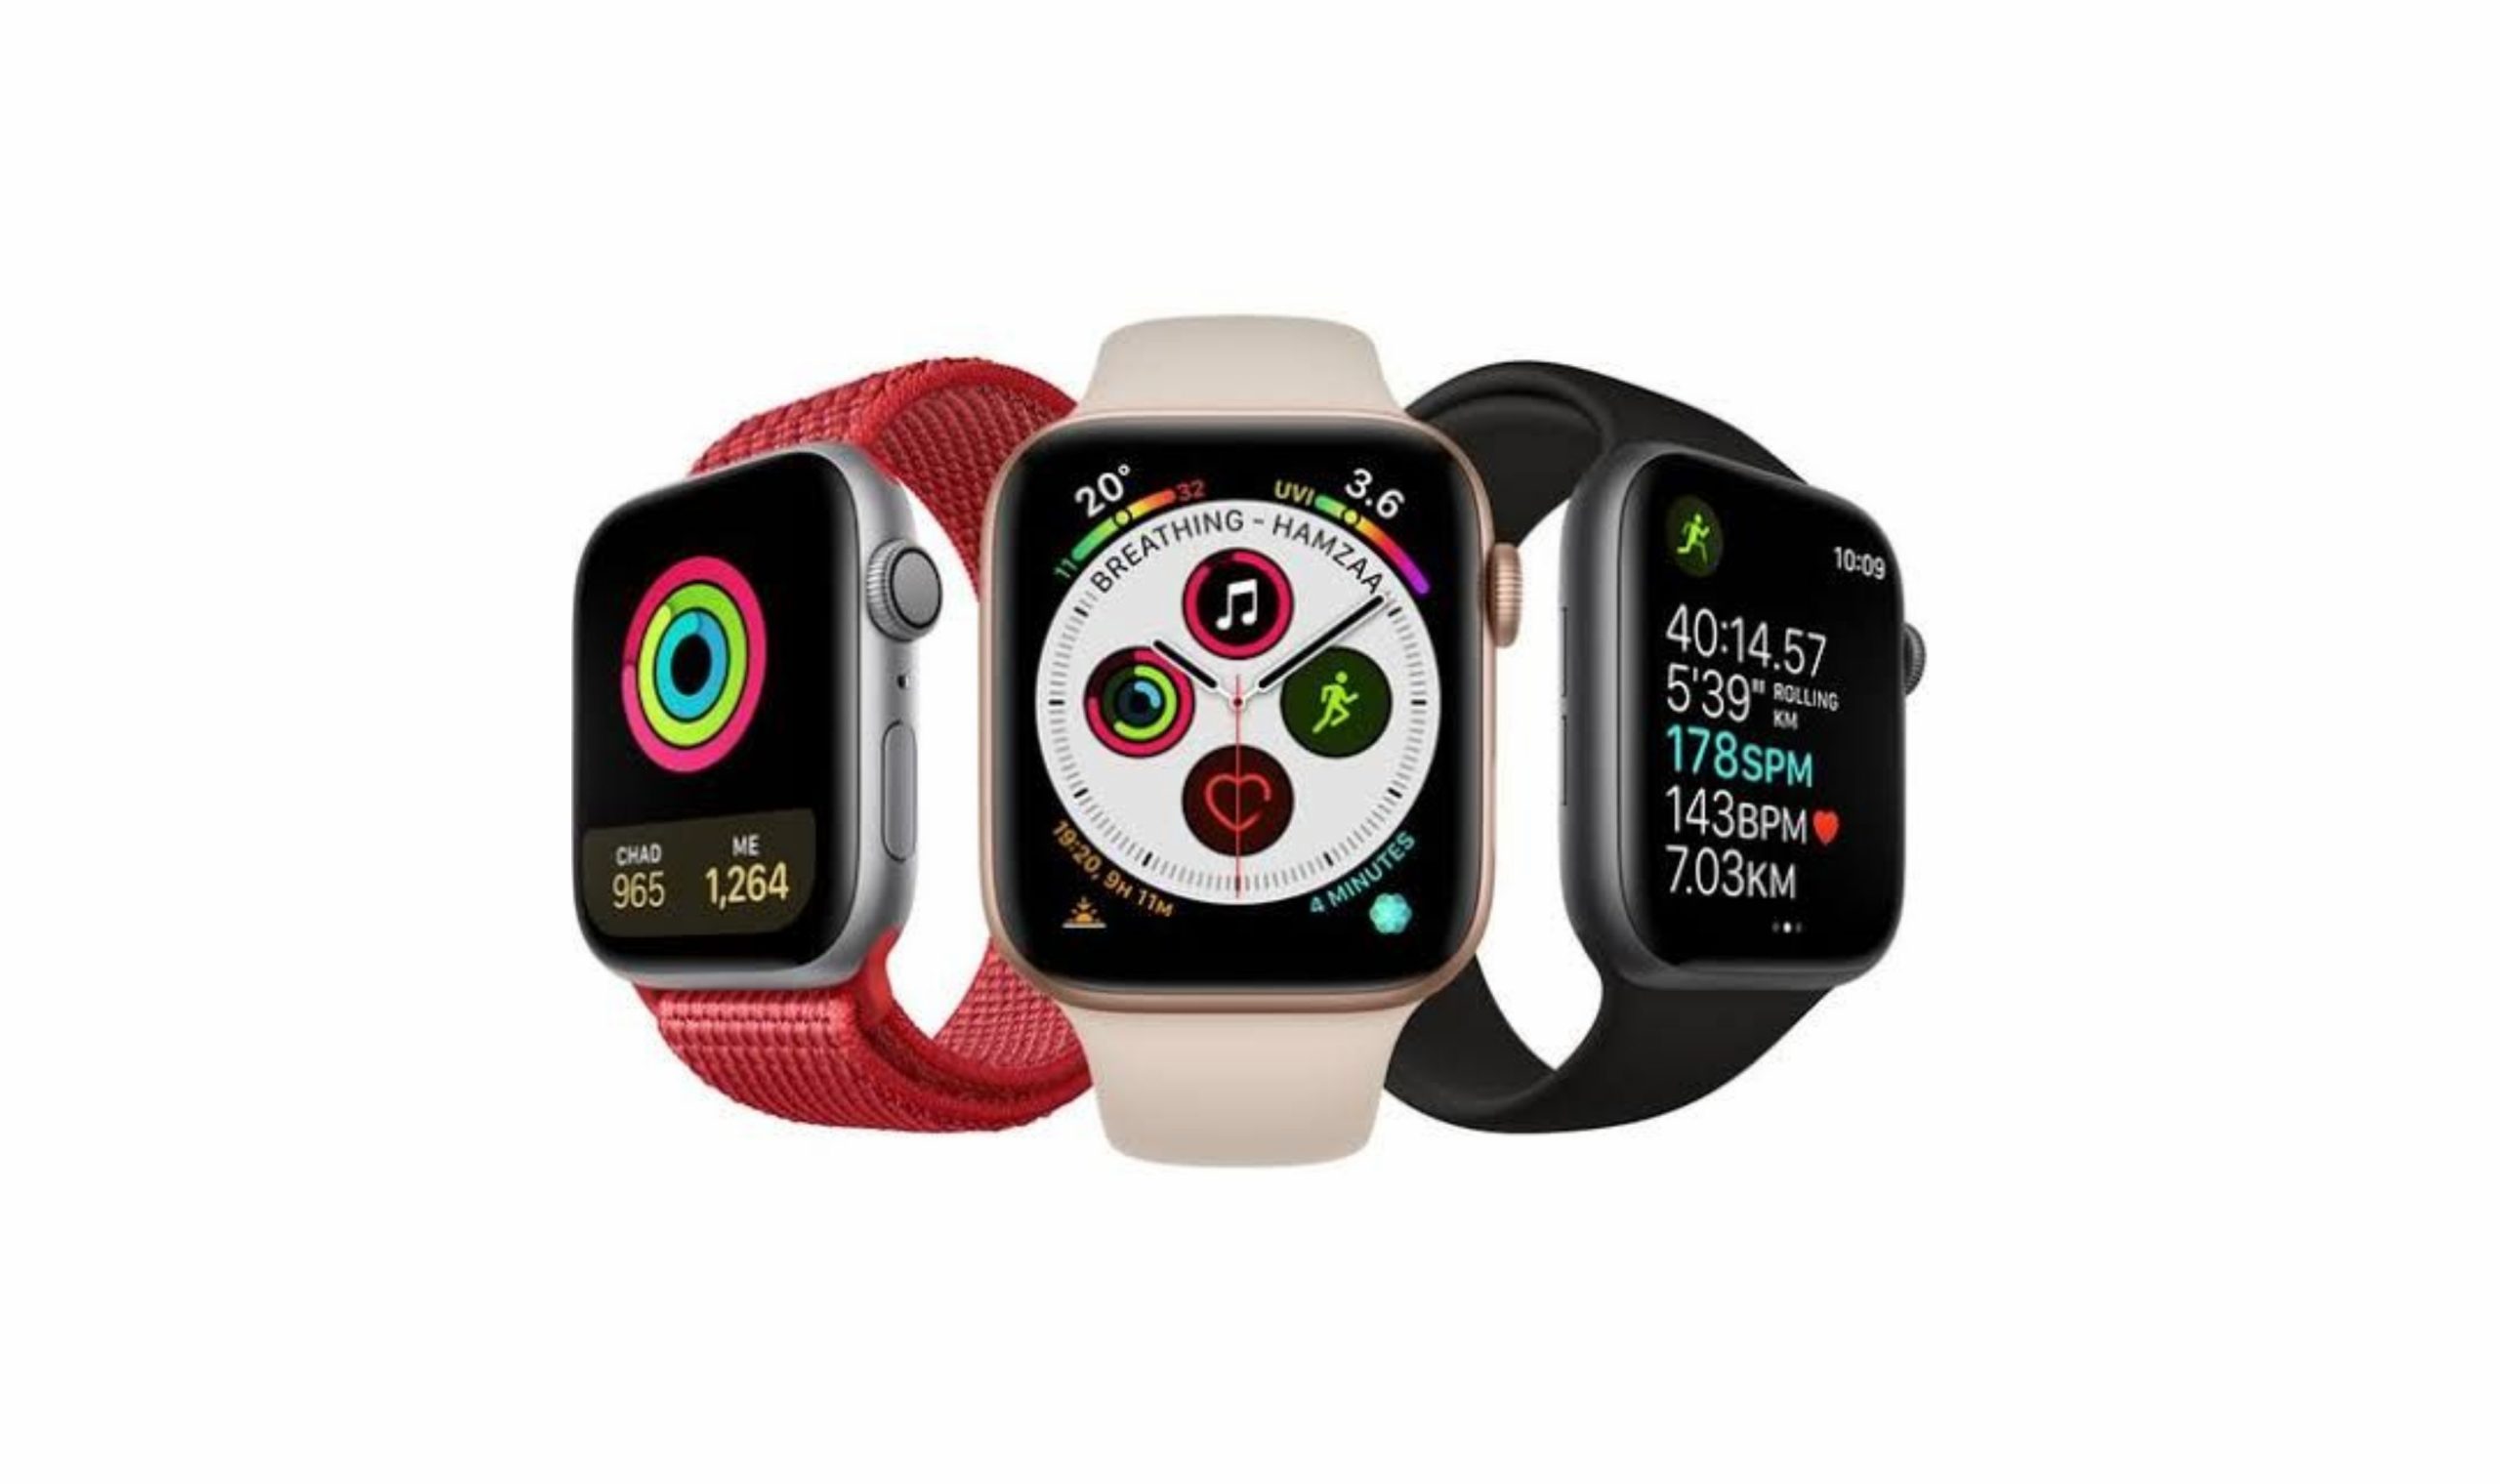 Apple Watch Series 5 and SE users are eligible for free repairs over Power Reserve bug